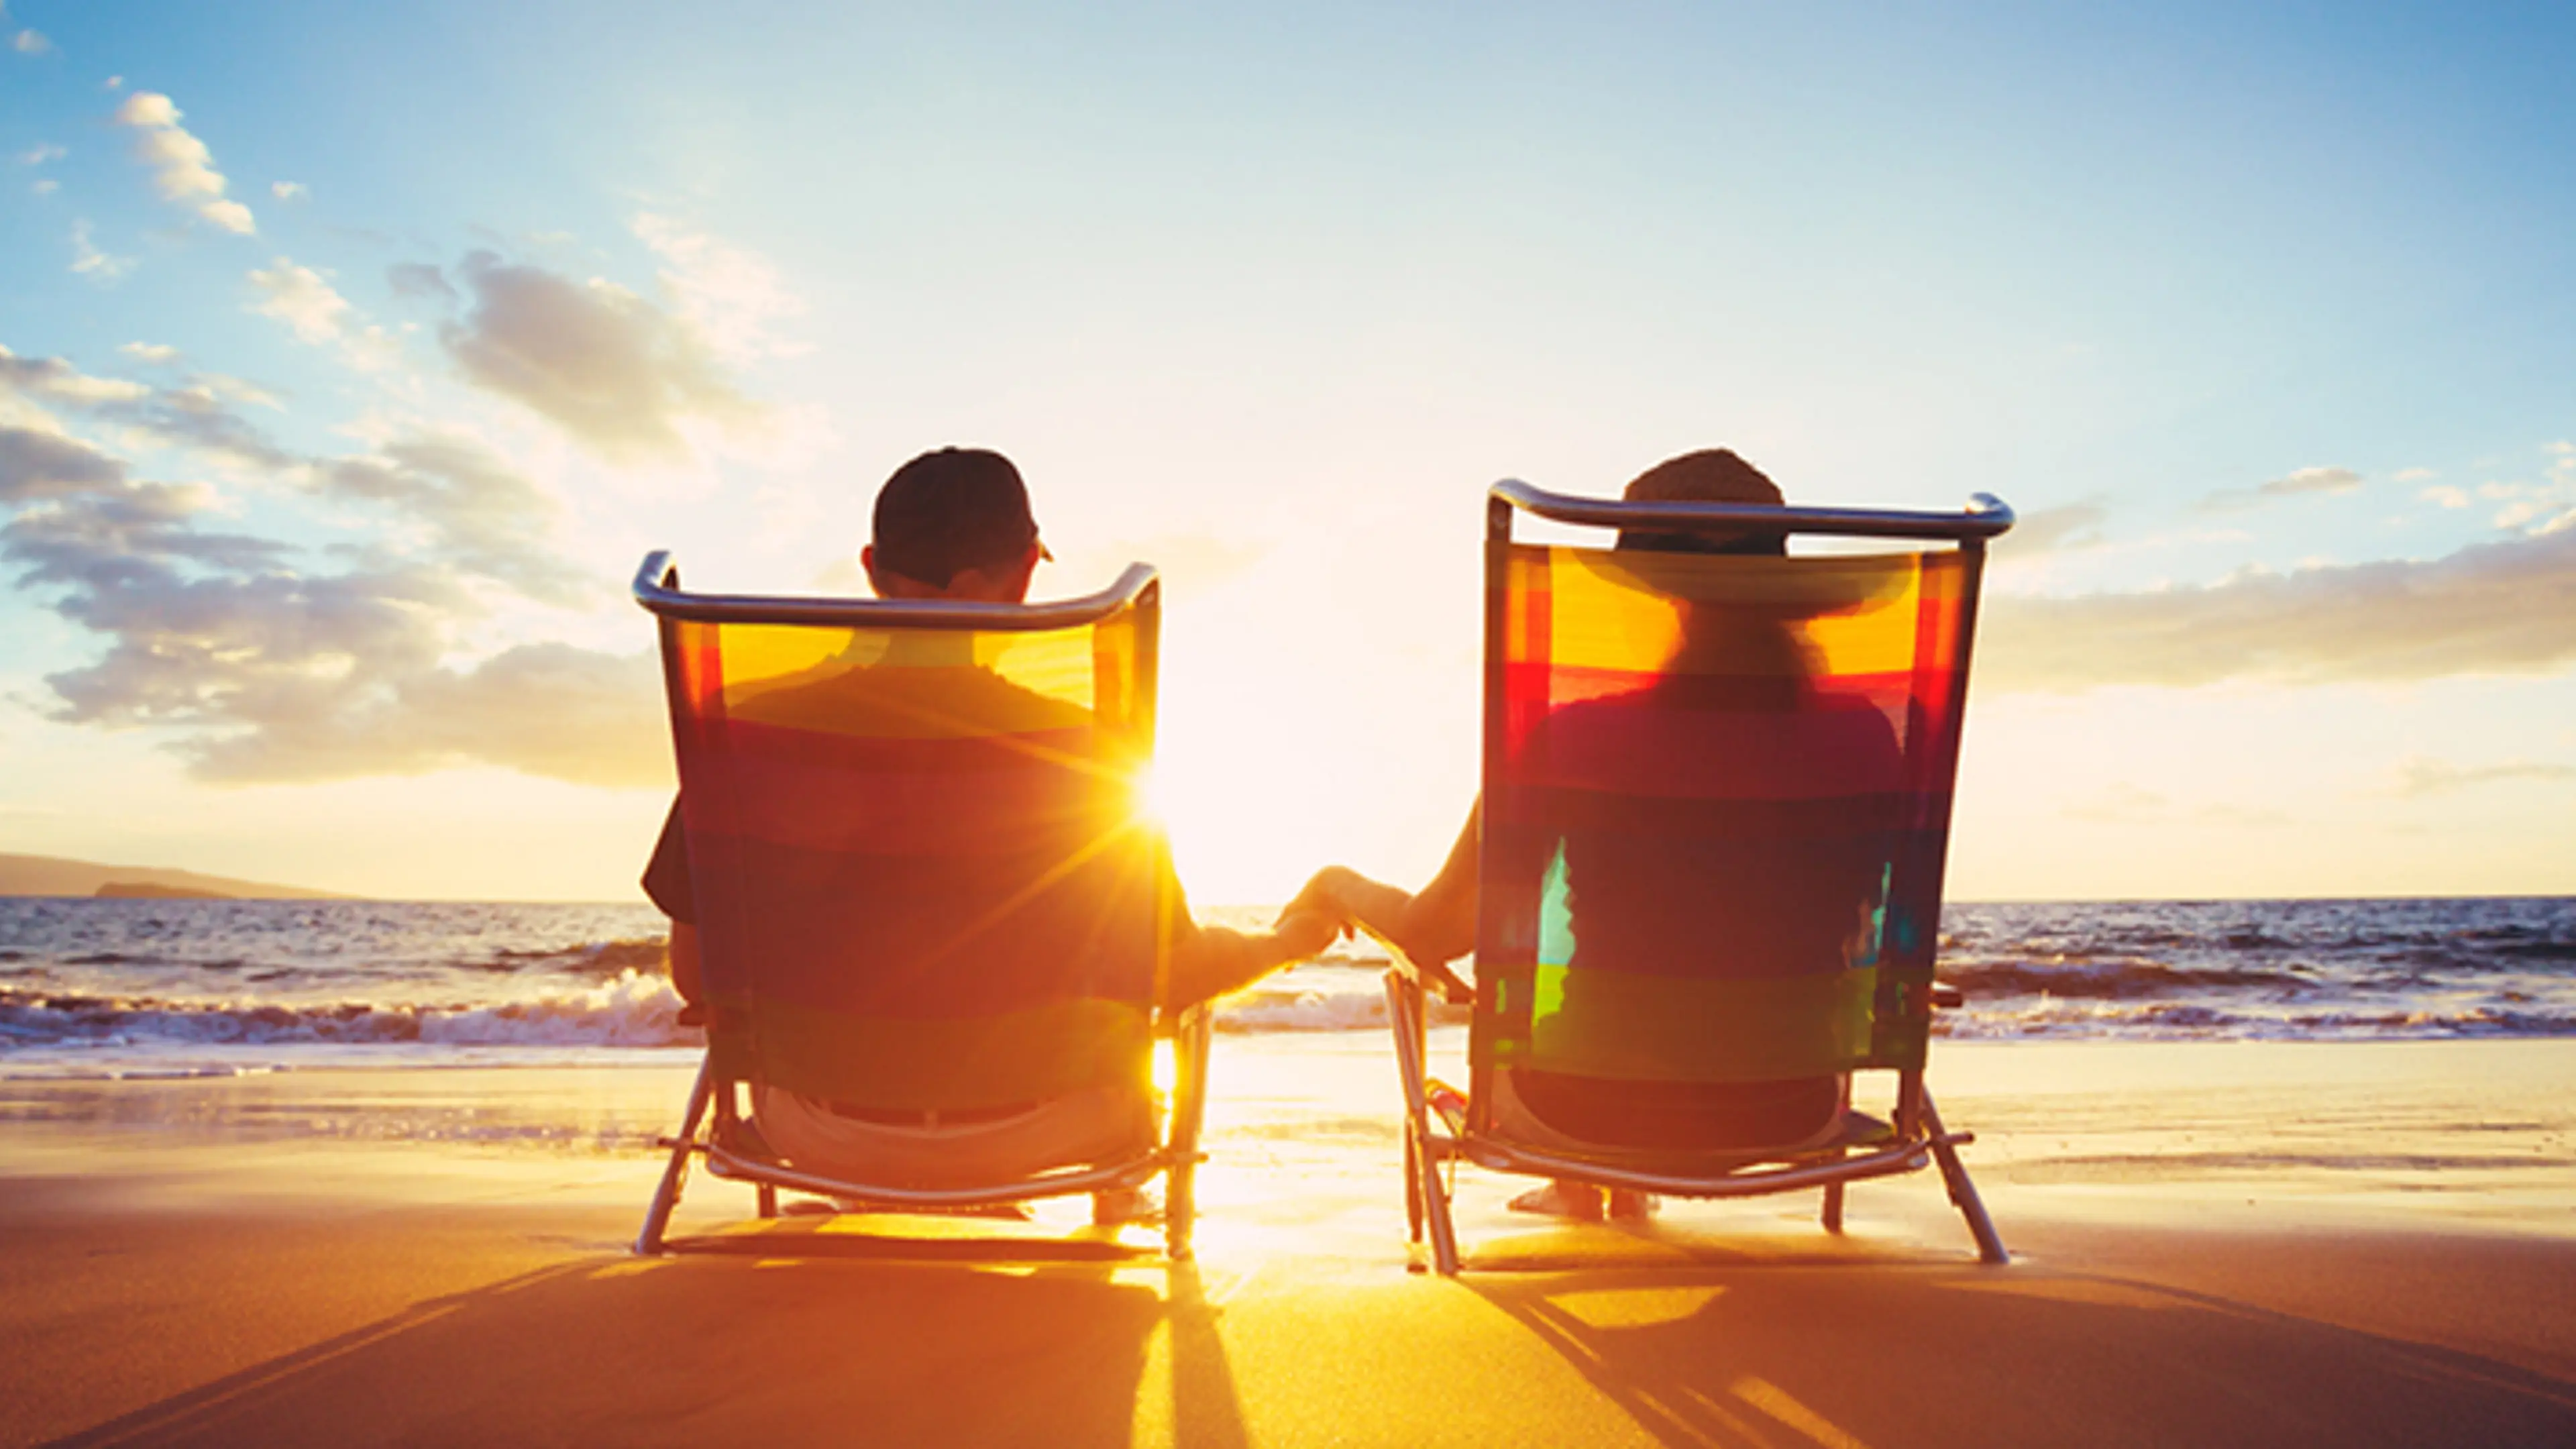 Retire early: 5 proven strategies for financial freedom
